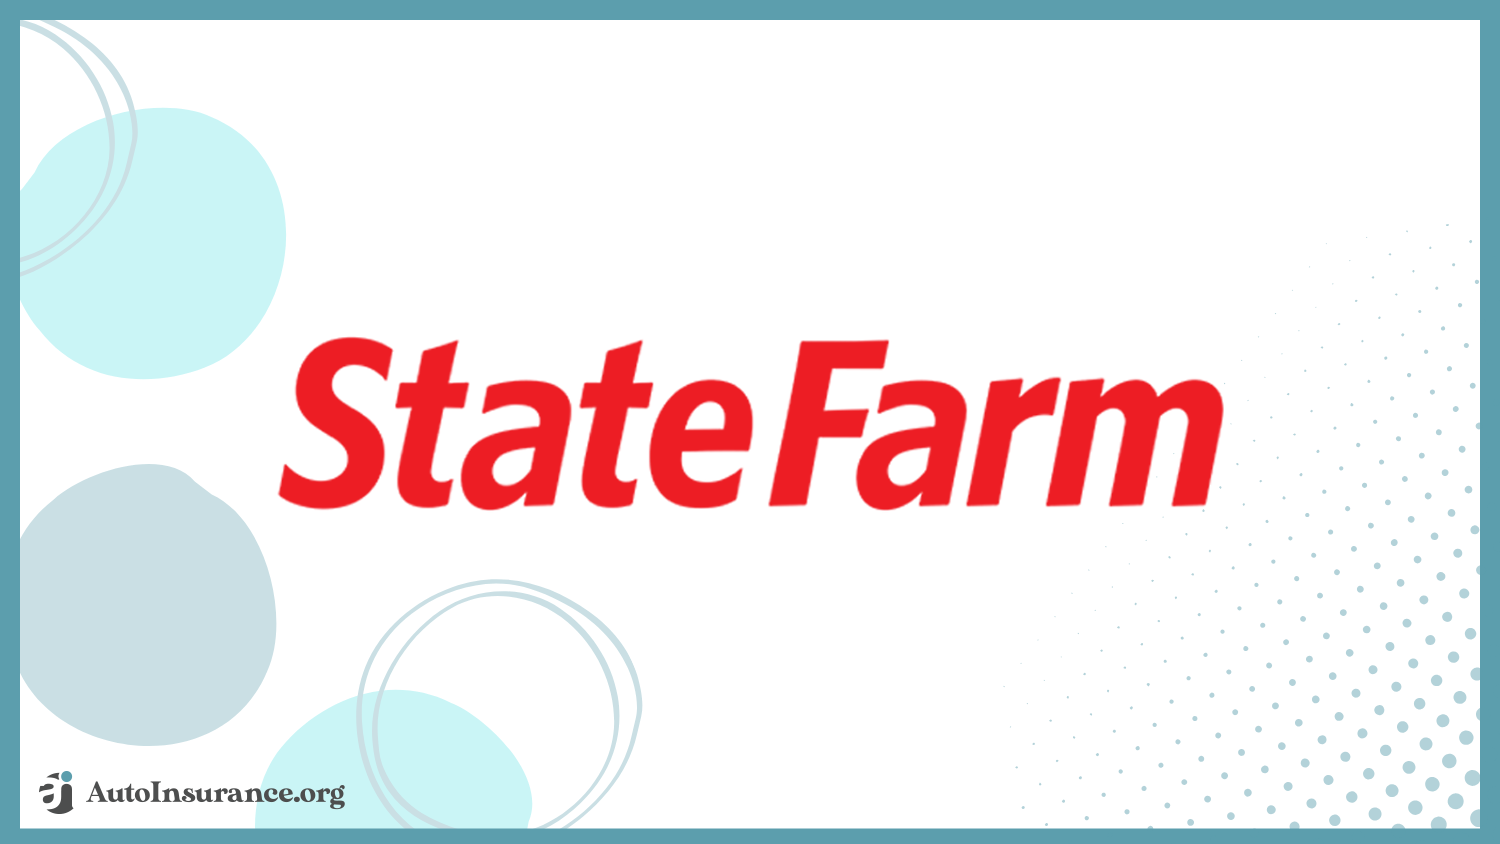 State Farm: Best Auto Insurance for Military Families and Veterans 